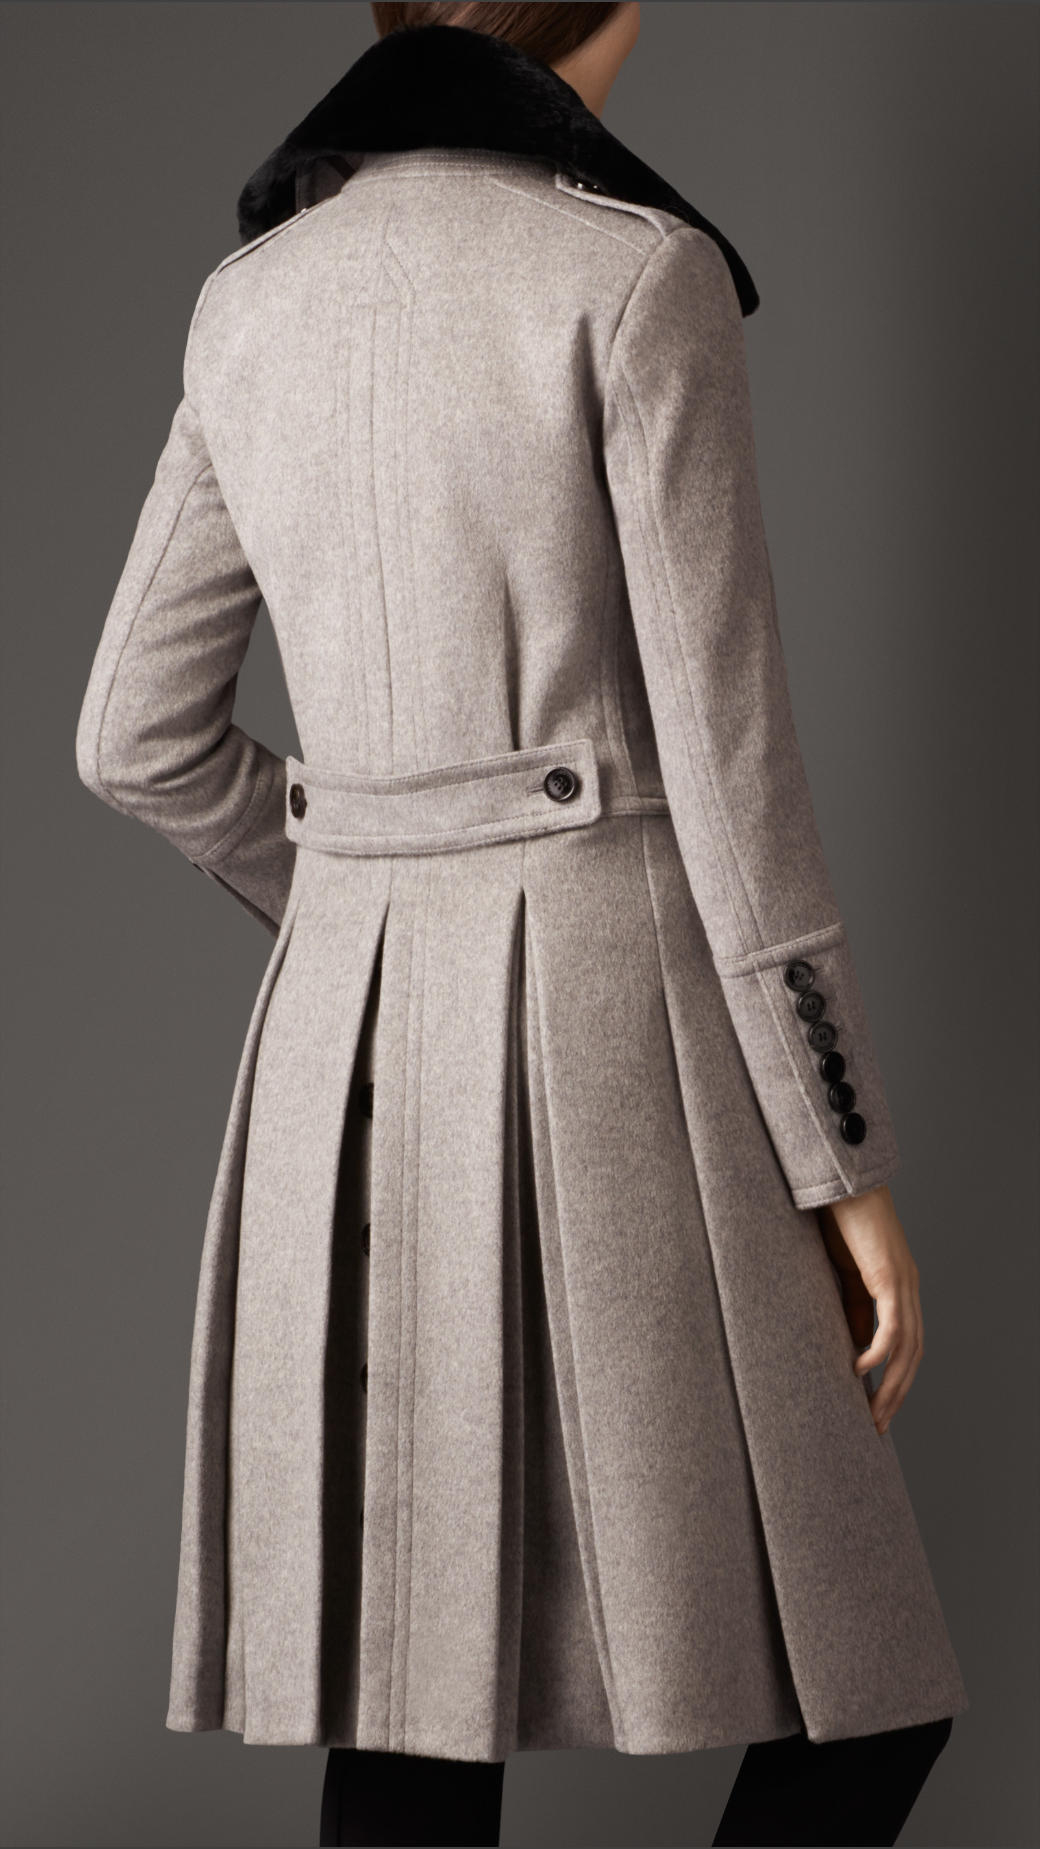 Burberry Wool Cashmere Military Coat in Pale Grey Melange (Gray) - Lyst